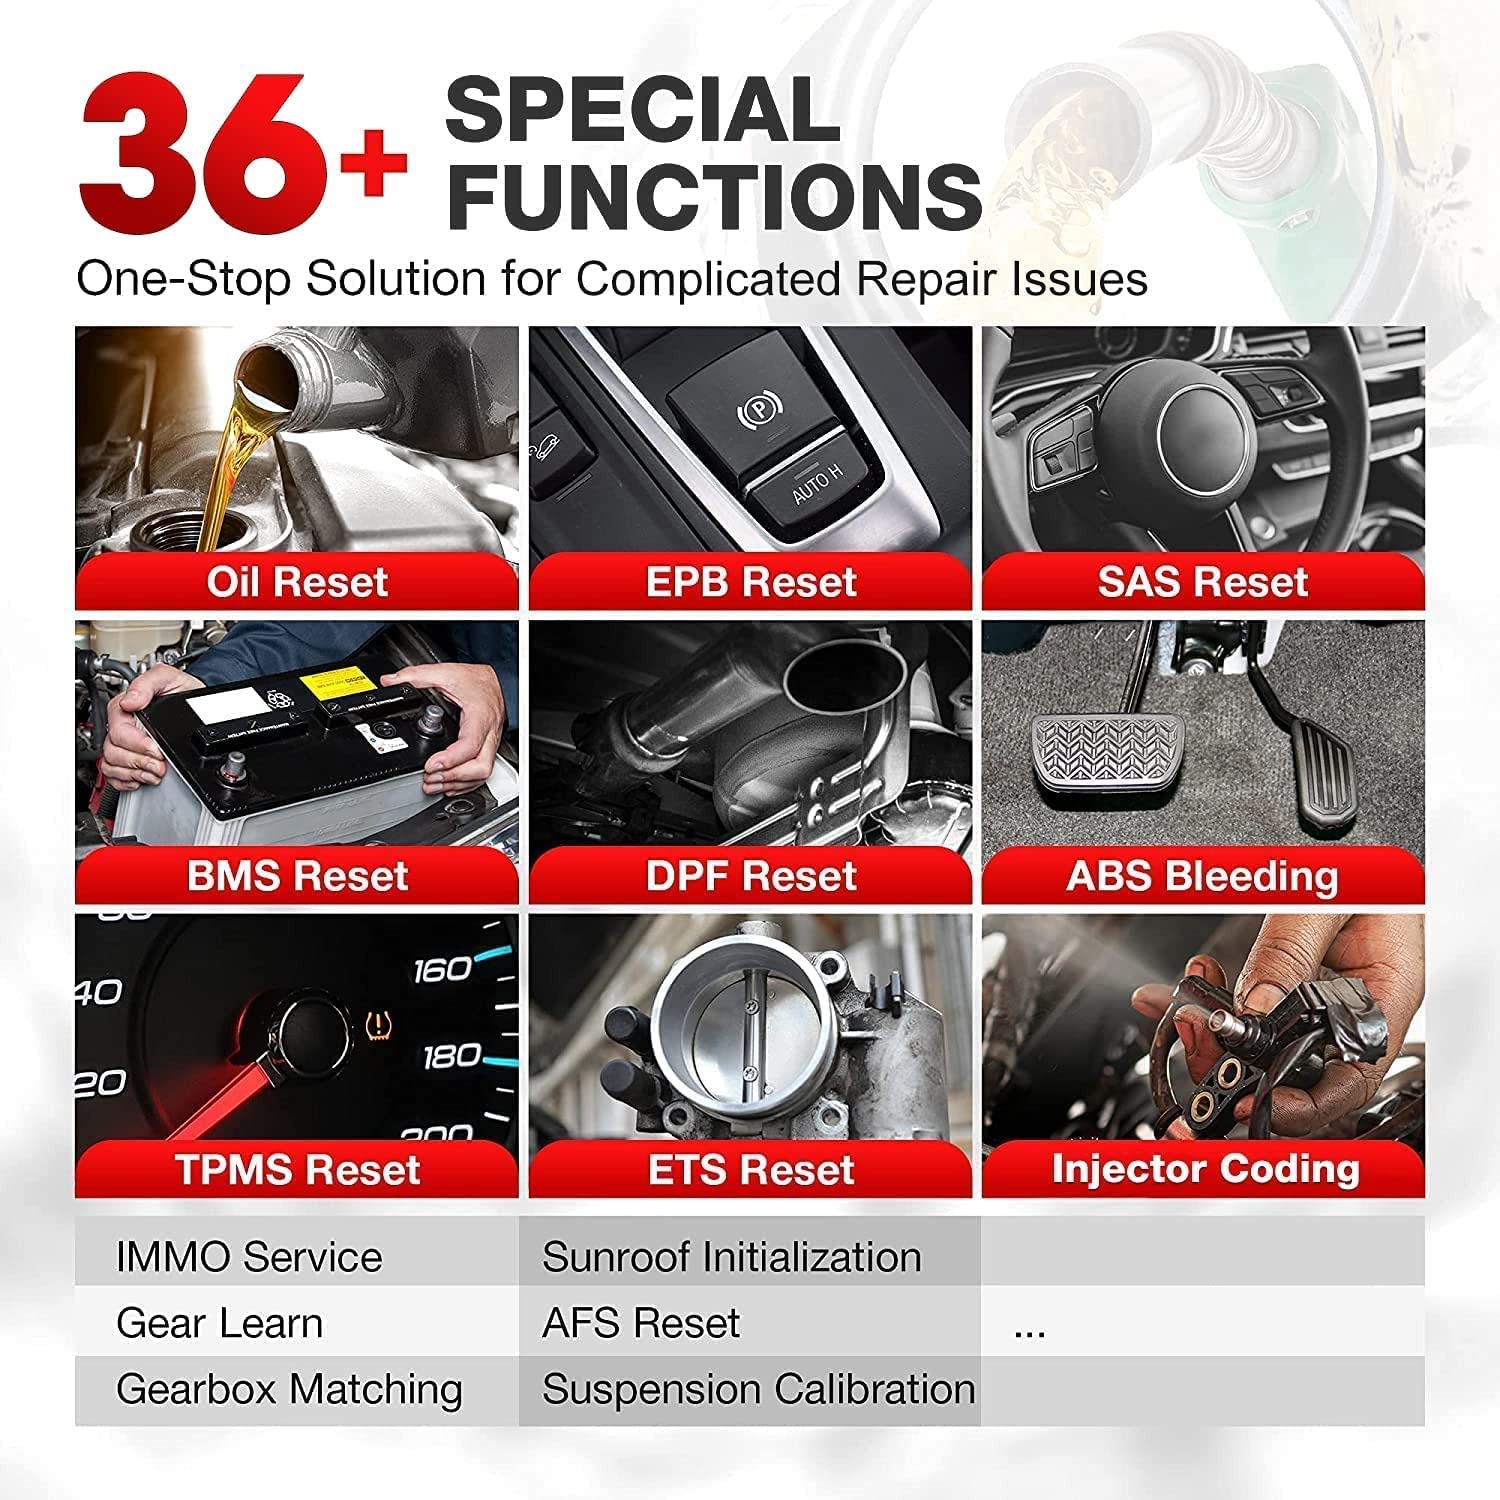 36+ Special Functions